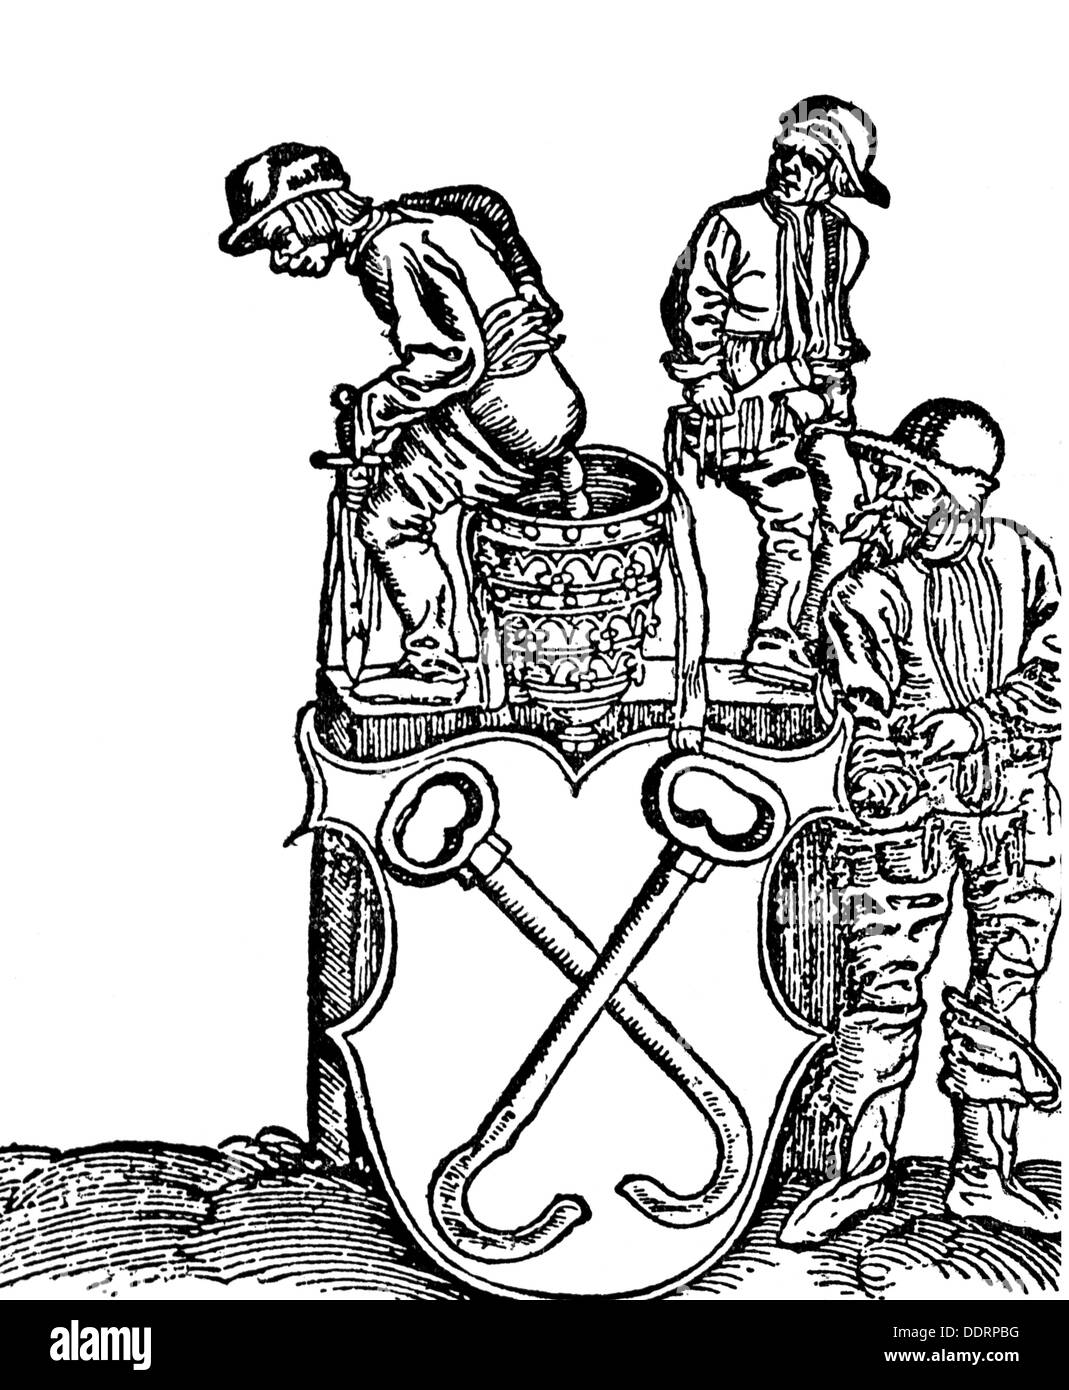 Reformation 1517 - 1555, caricature of the Papal coat of arms, woodcut, Wittenberg, 1545, 16th century, graphic, graphics, religion, religions, Christianity, Reformation, Protestantism, humor, humour, satire, polemic, polemics, propaganda, Catholic Pope, Pontiff, Popes, papacy, coat of arms, tiara, disrespect, opposition, insurgency, rebellion, insurgencies, revolts, rebellions, in revolt, bowel movement, defecation, defaecation, excretion, extretion, excretions, caricature, caricatures, woodcut, woodcuts, historic, historical, male, man, men, people, Additional-Rights-Clearences-Not Available Stock Photo